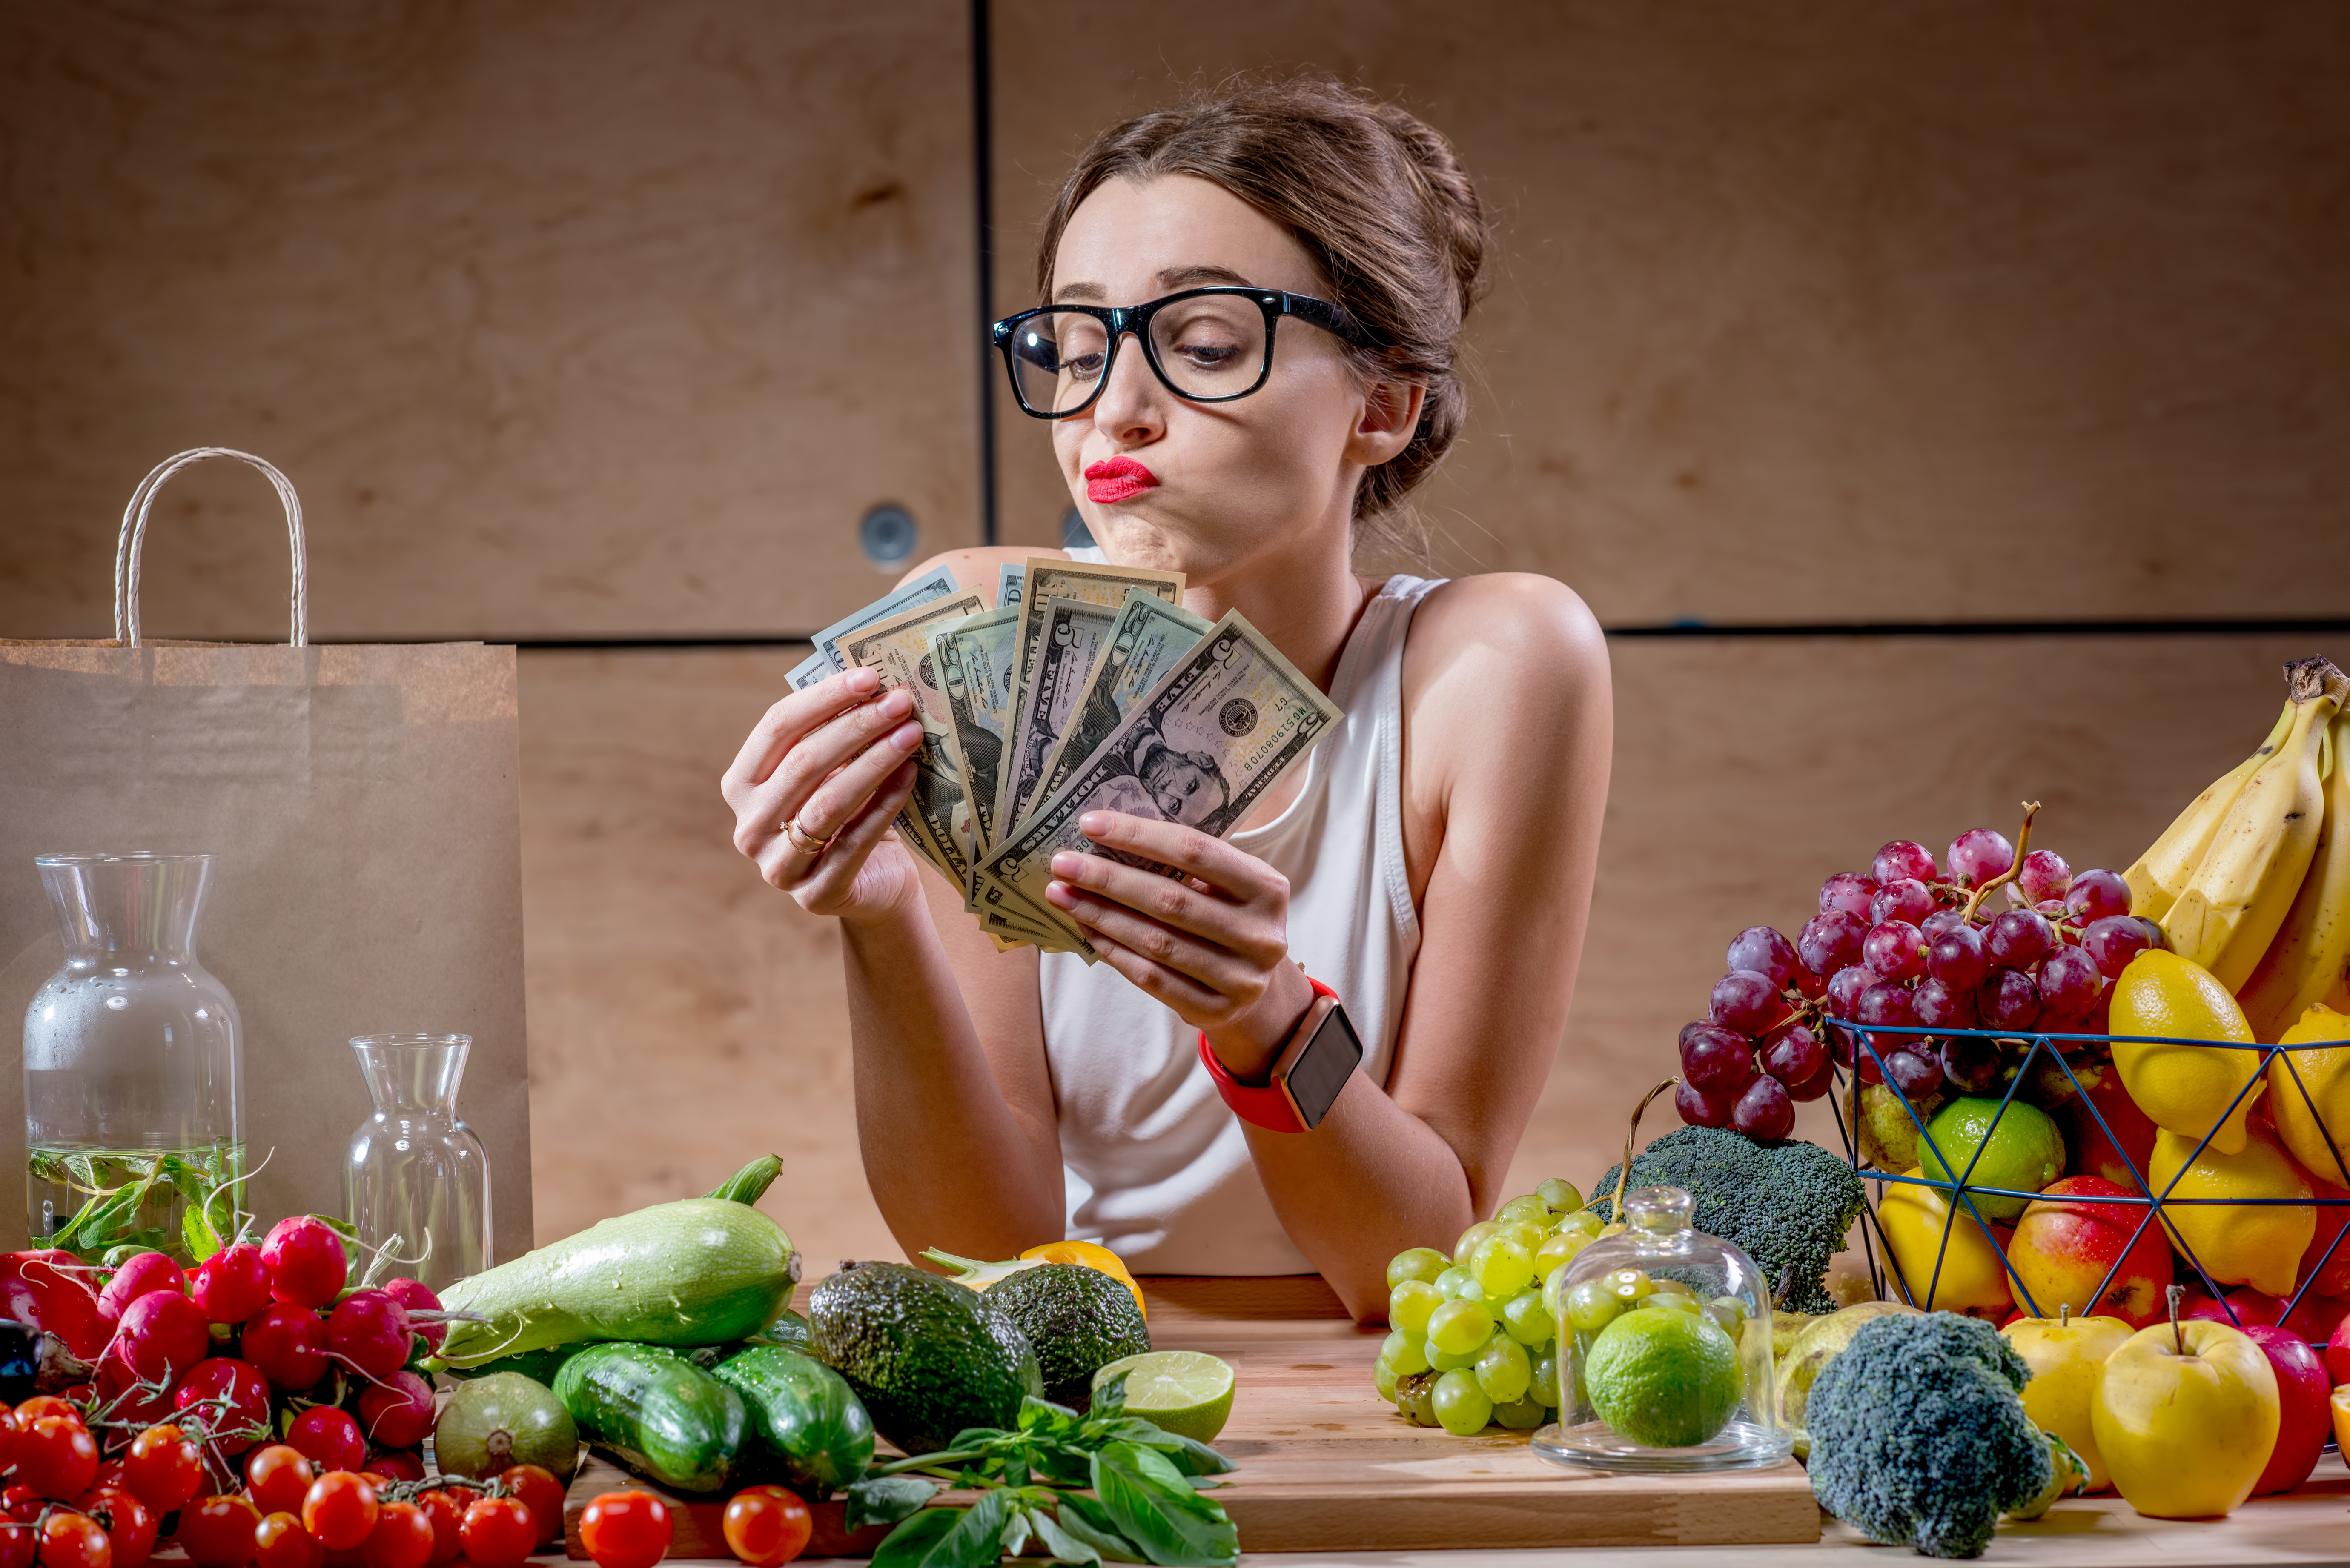 Tips for Eating Healthy On a Budget